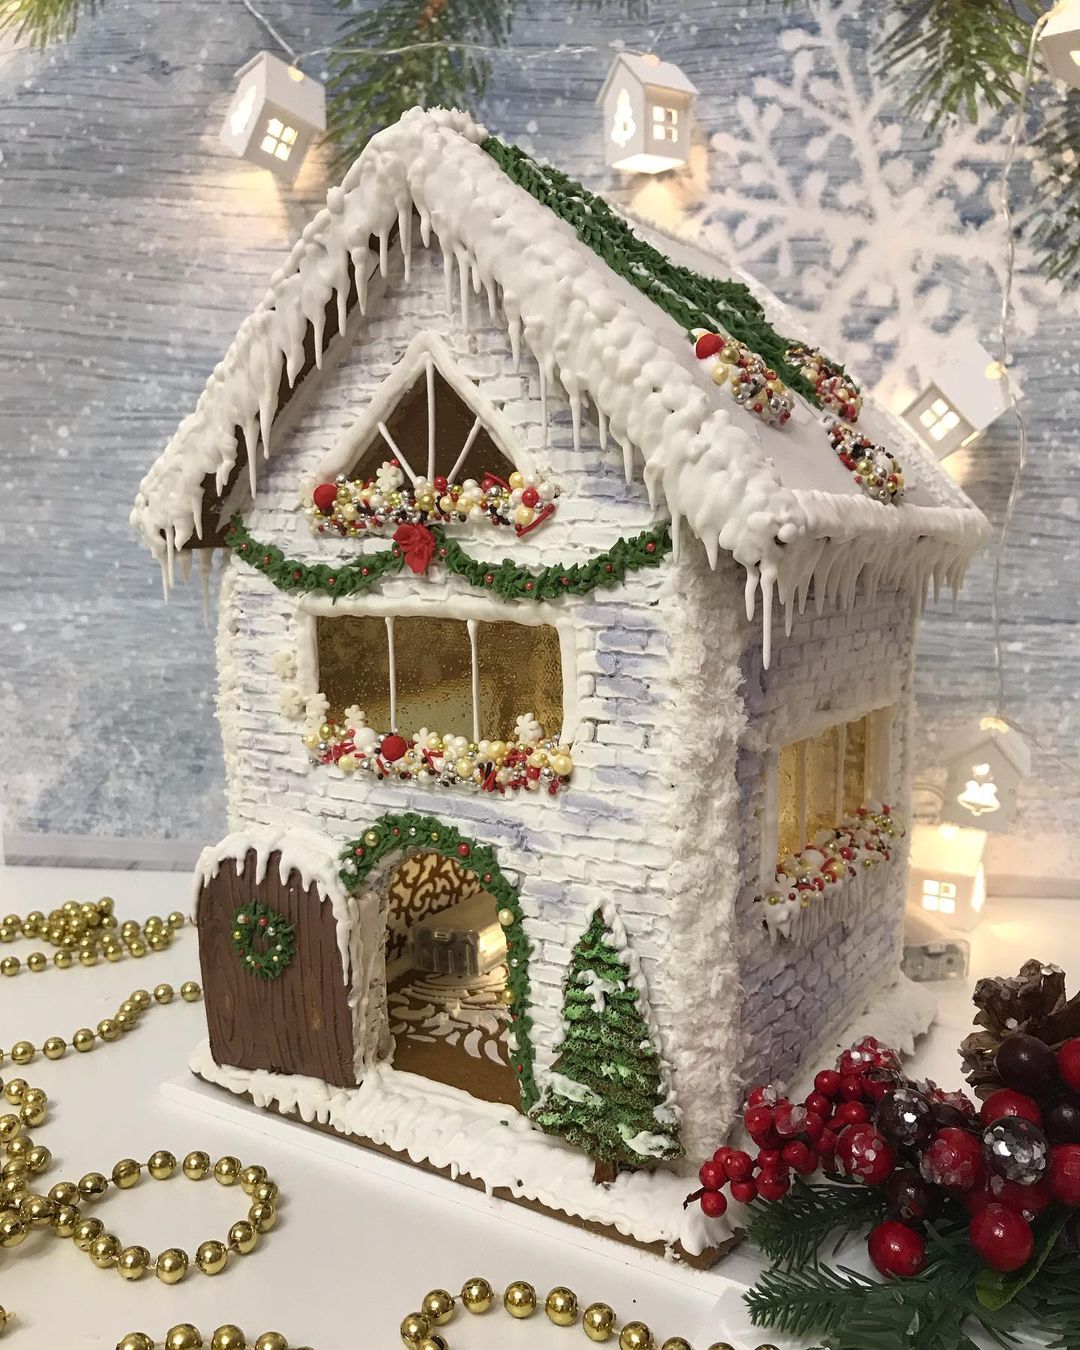 25 magical gingerbread houses to feast your eyes on